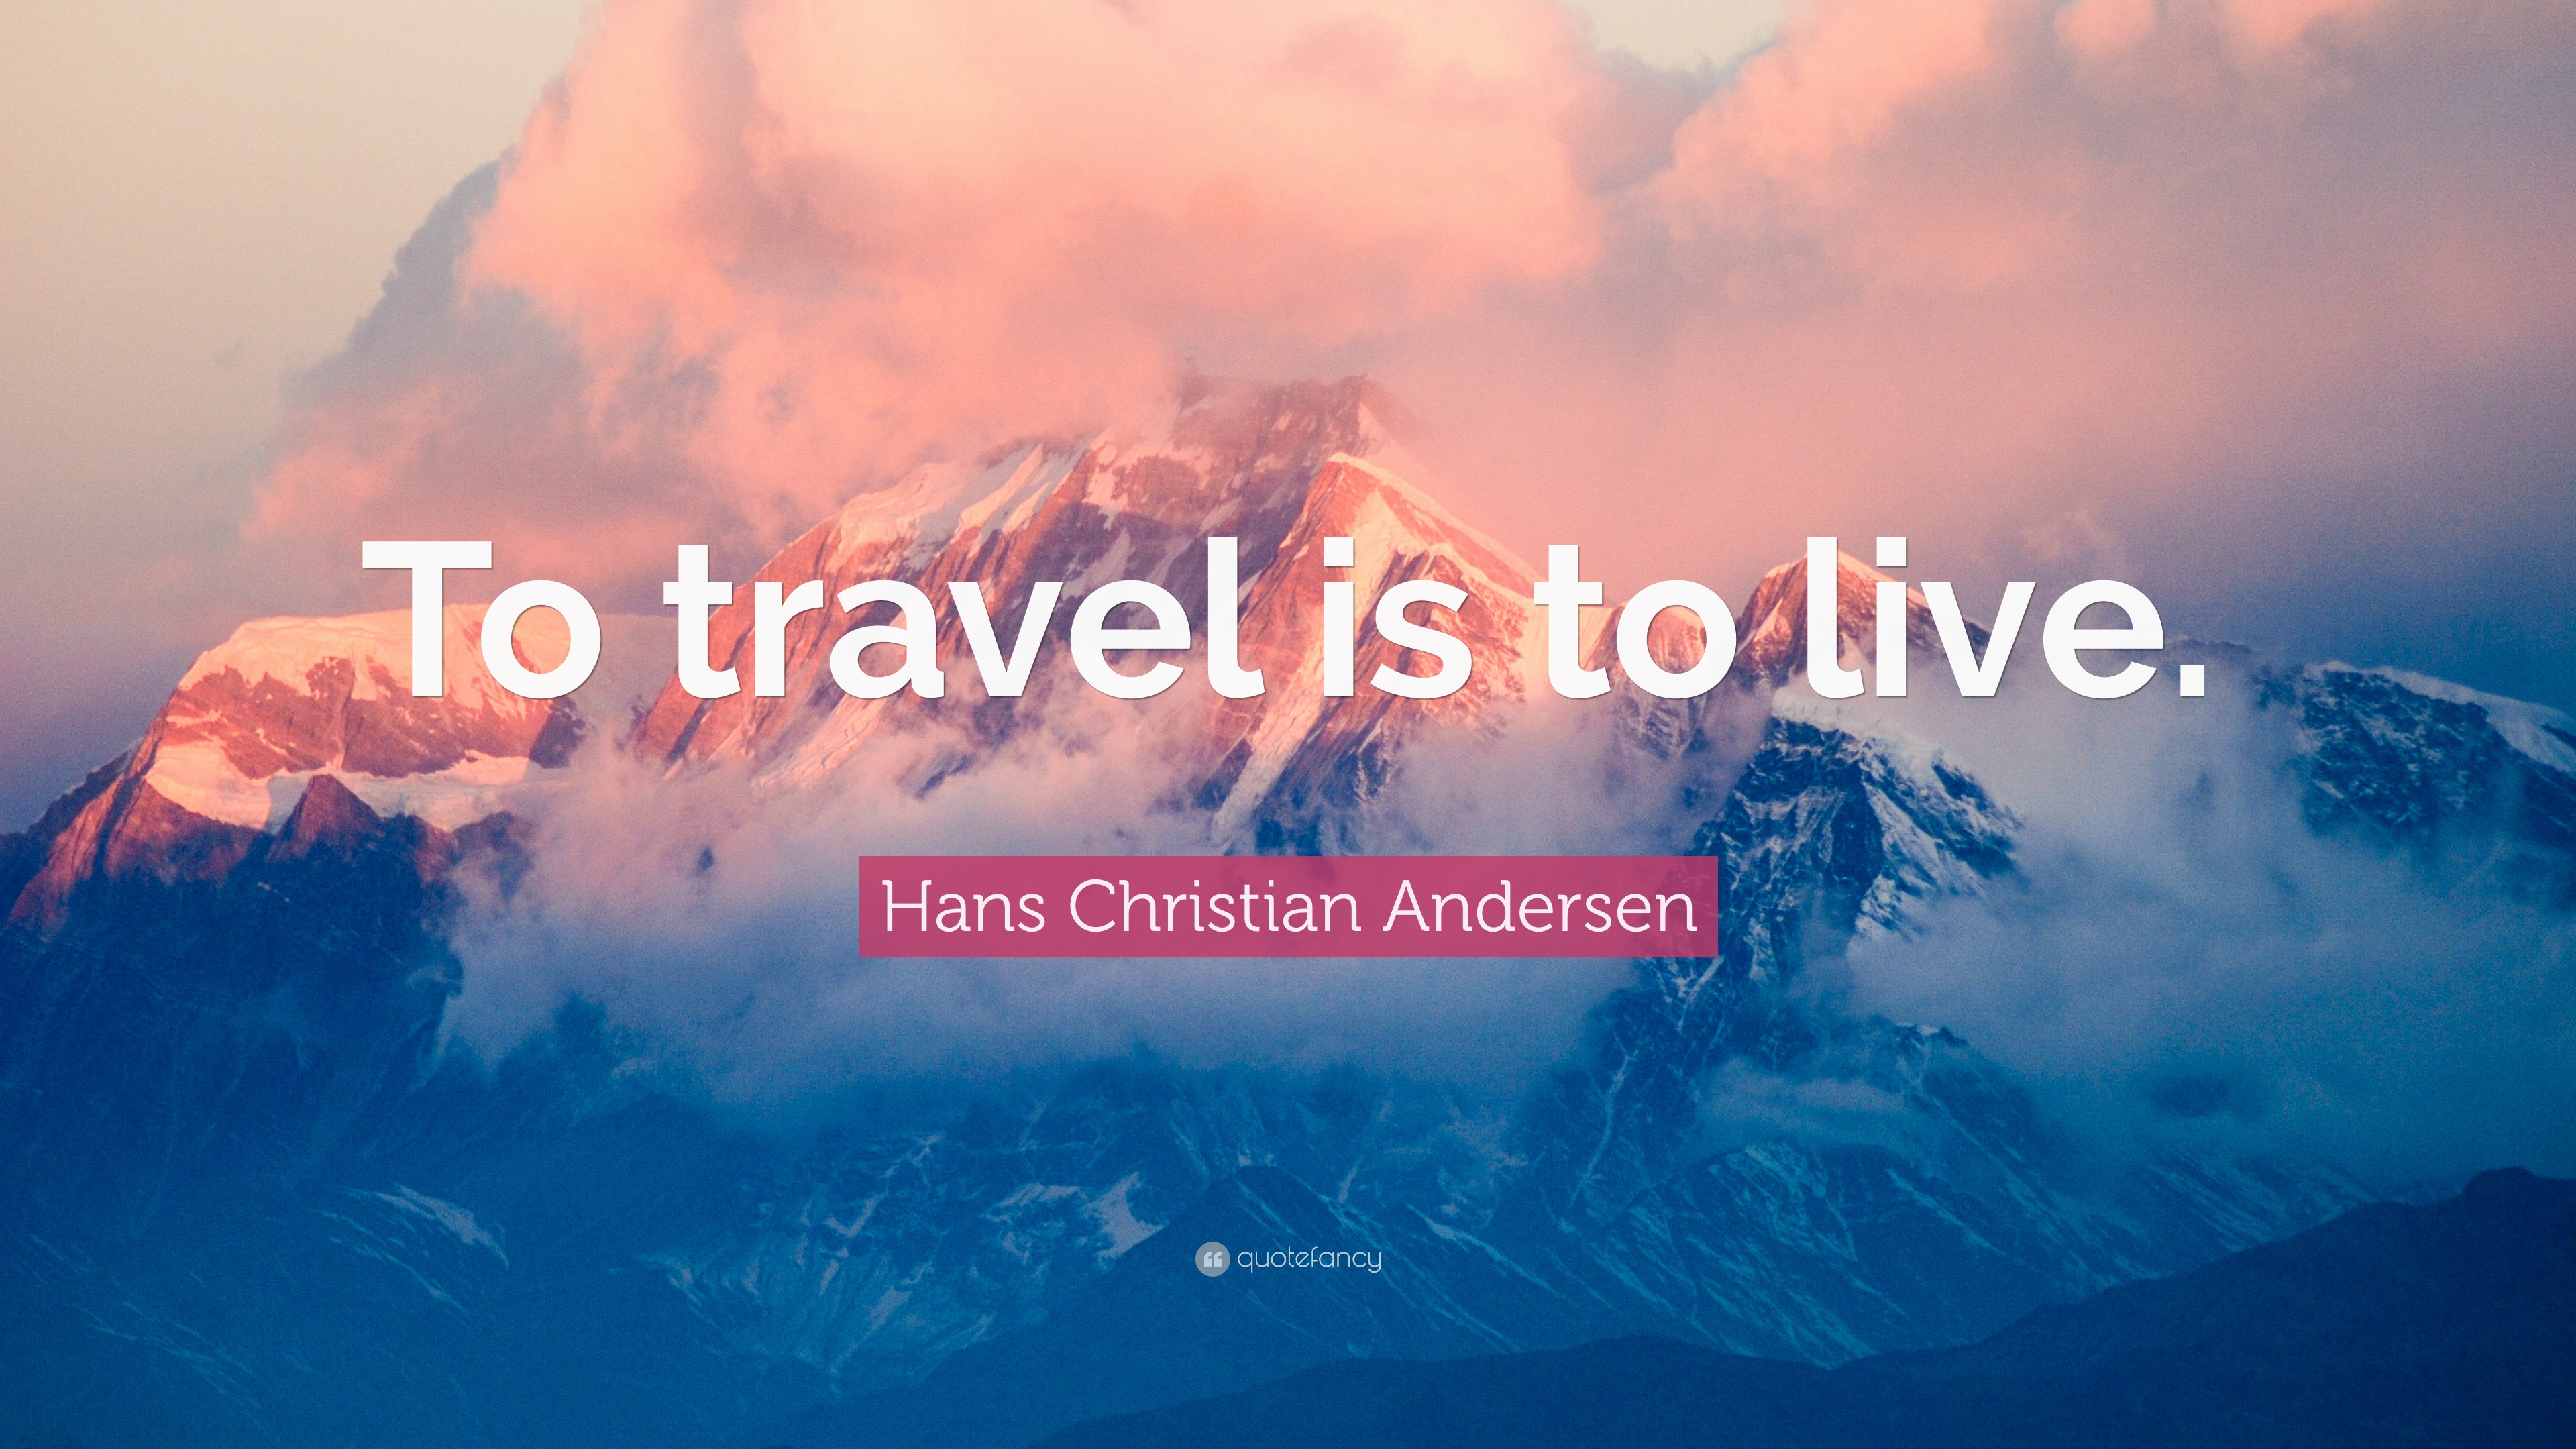 Hans Christian Andersen Quote: “To travel is to live.” (12 ...